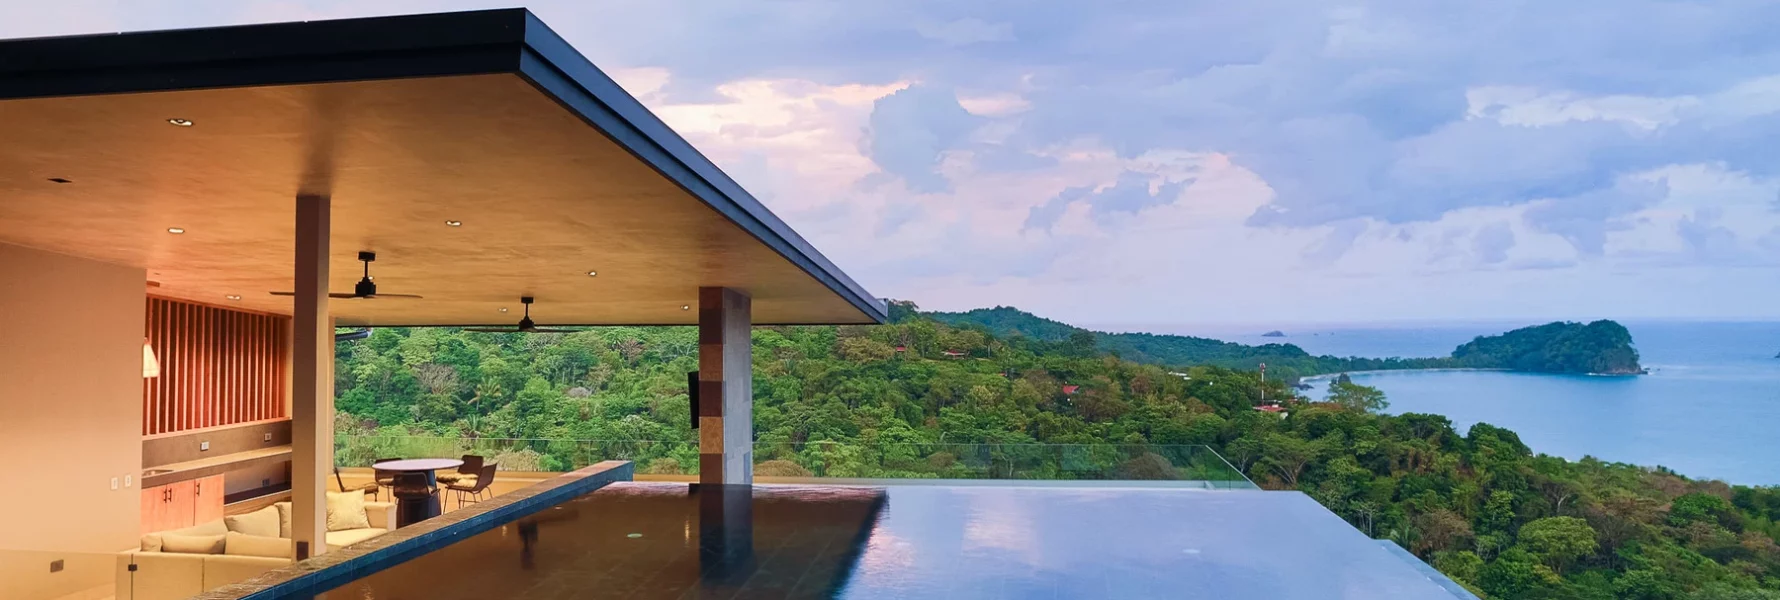 The rooftop infinity saltwater pool of this stunning villa has one of the best views in all of Manuel Antonio.